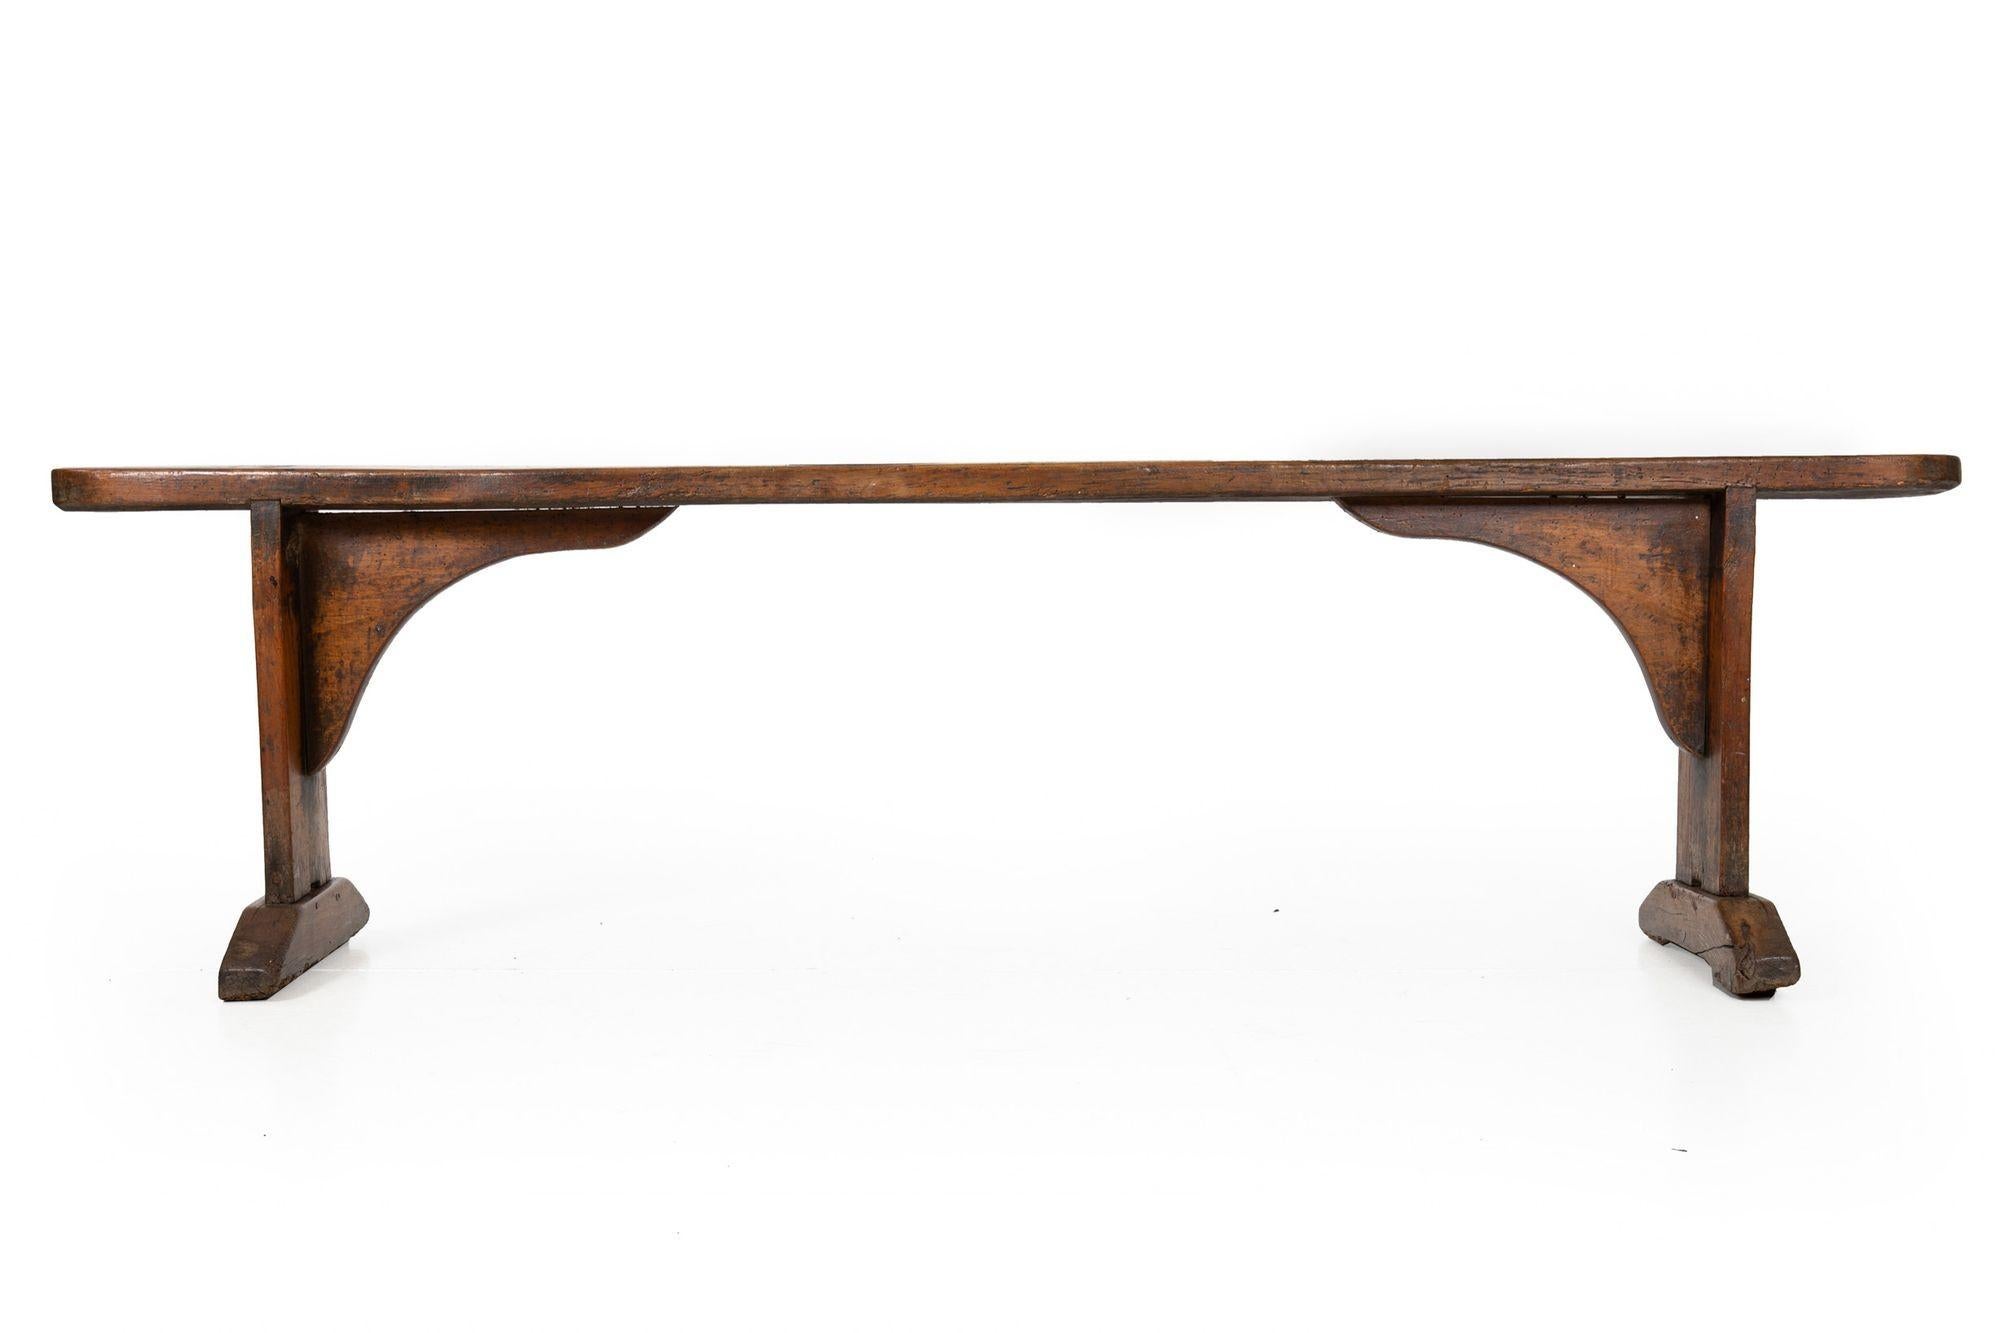 circa 1750 English Georgian Patinated and Worn Elm Trestle Bench In Good Condition For Sale In Shippensburg, PA